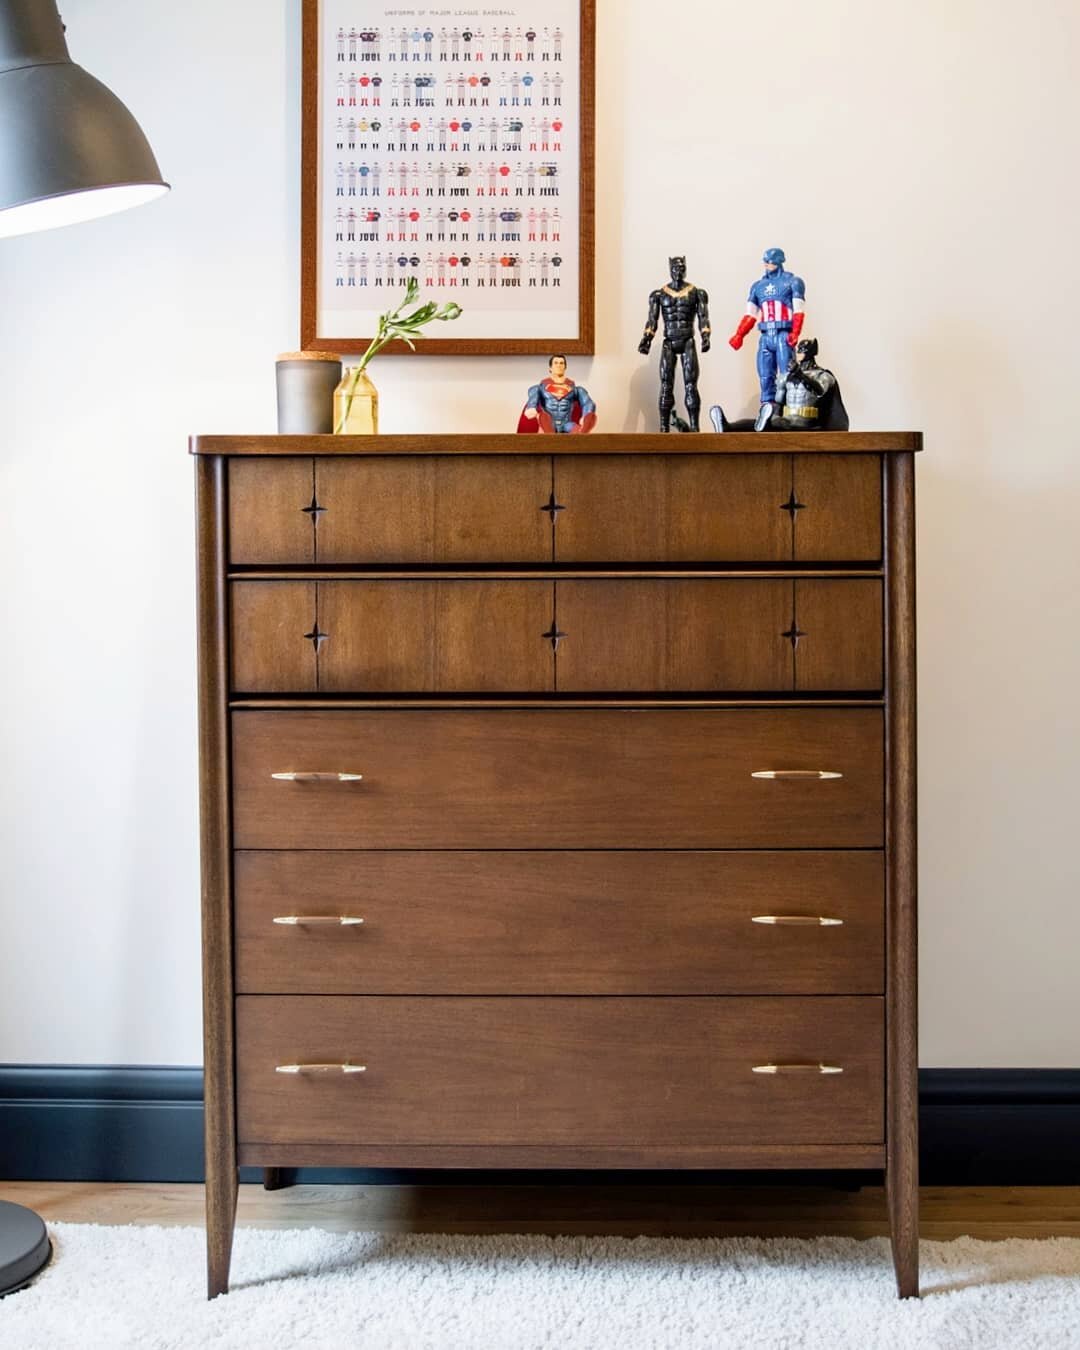 SOLD

Broyhill Saga mid-century 5 drawer tallboy. Walnut make, newly refinished top and original pulls. Like new condition!

DM if interested.

Seen staged here in a @forgeandbow home.